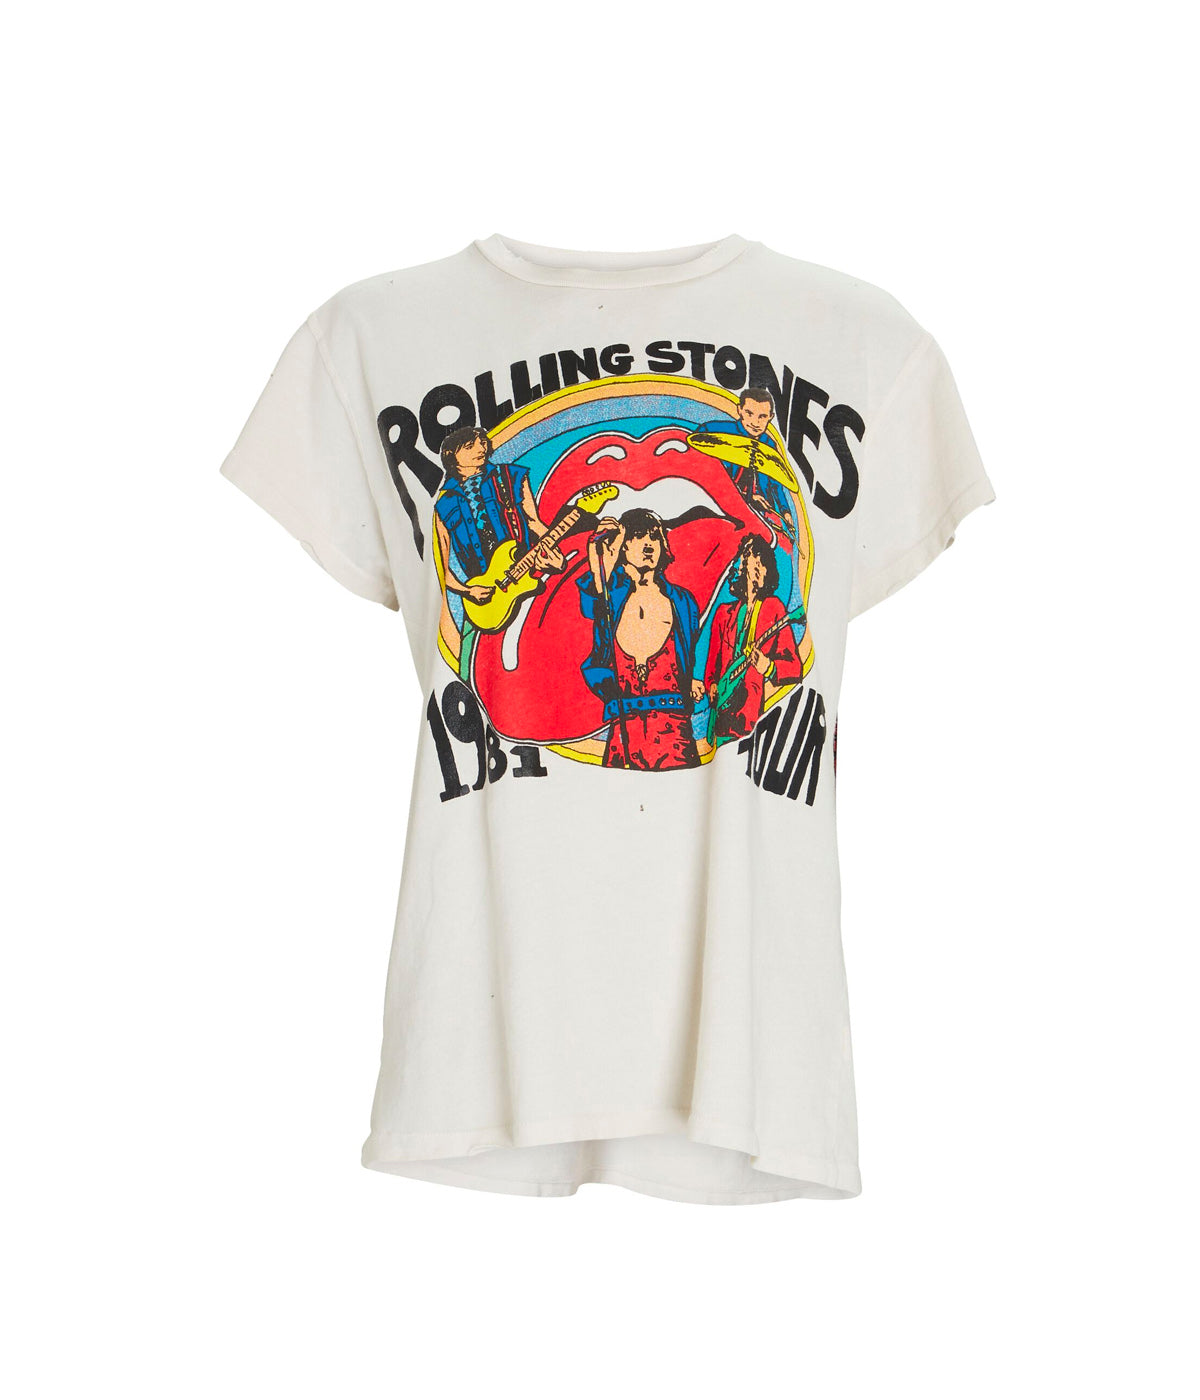 Rolling Stones 1981 Tour in Off White